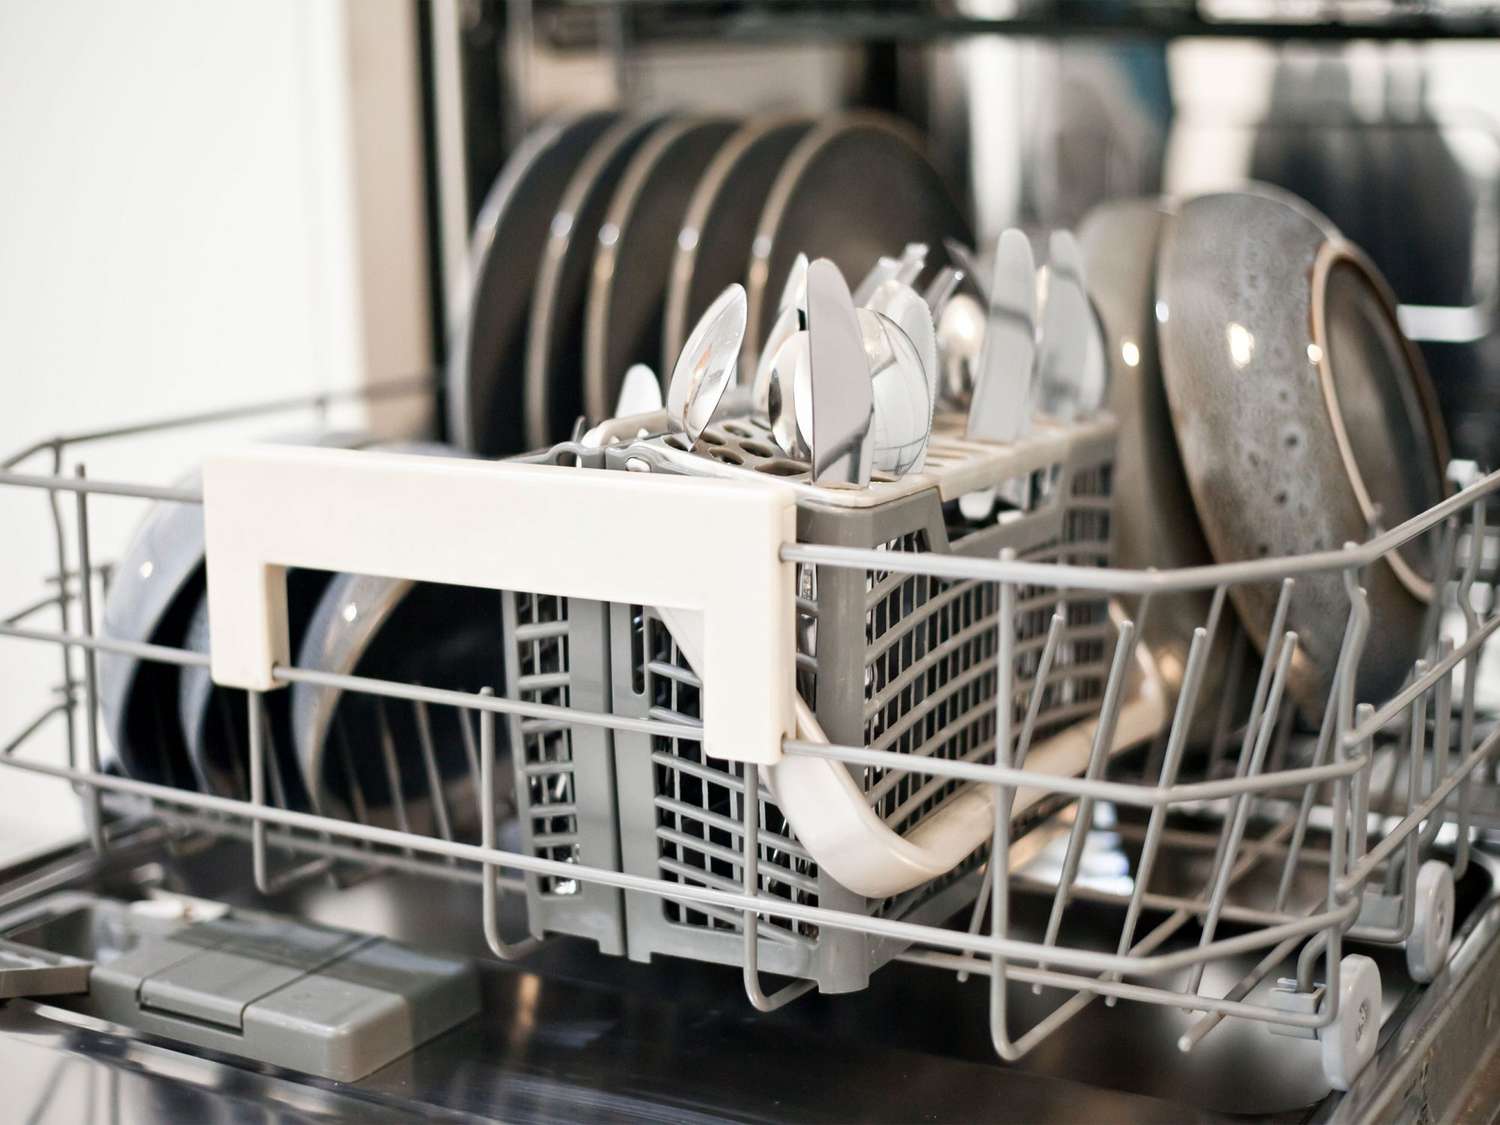 Dishwasher bottom rack loaded with clean dishes